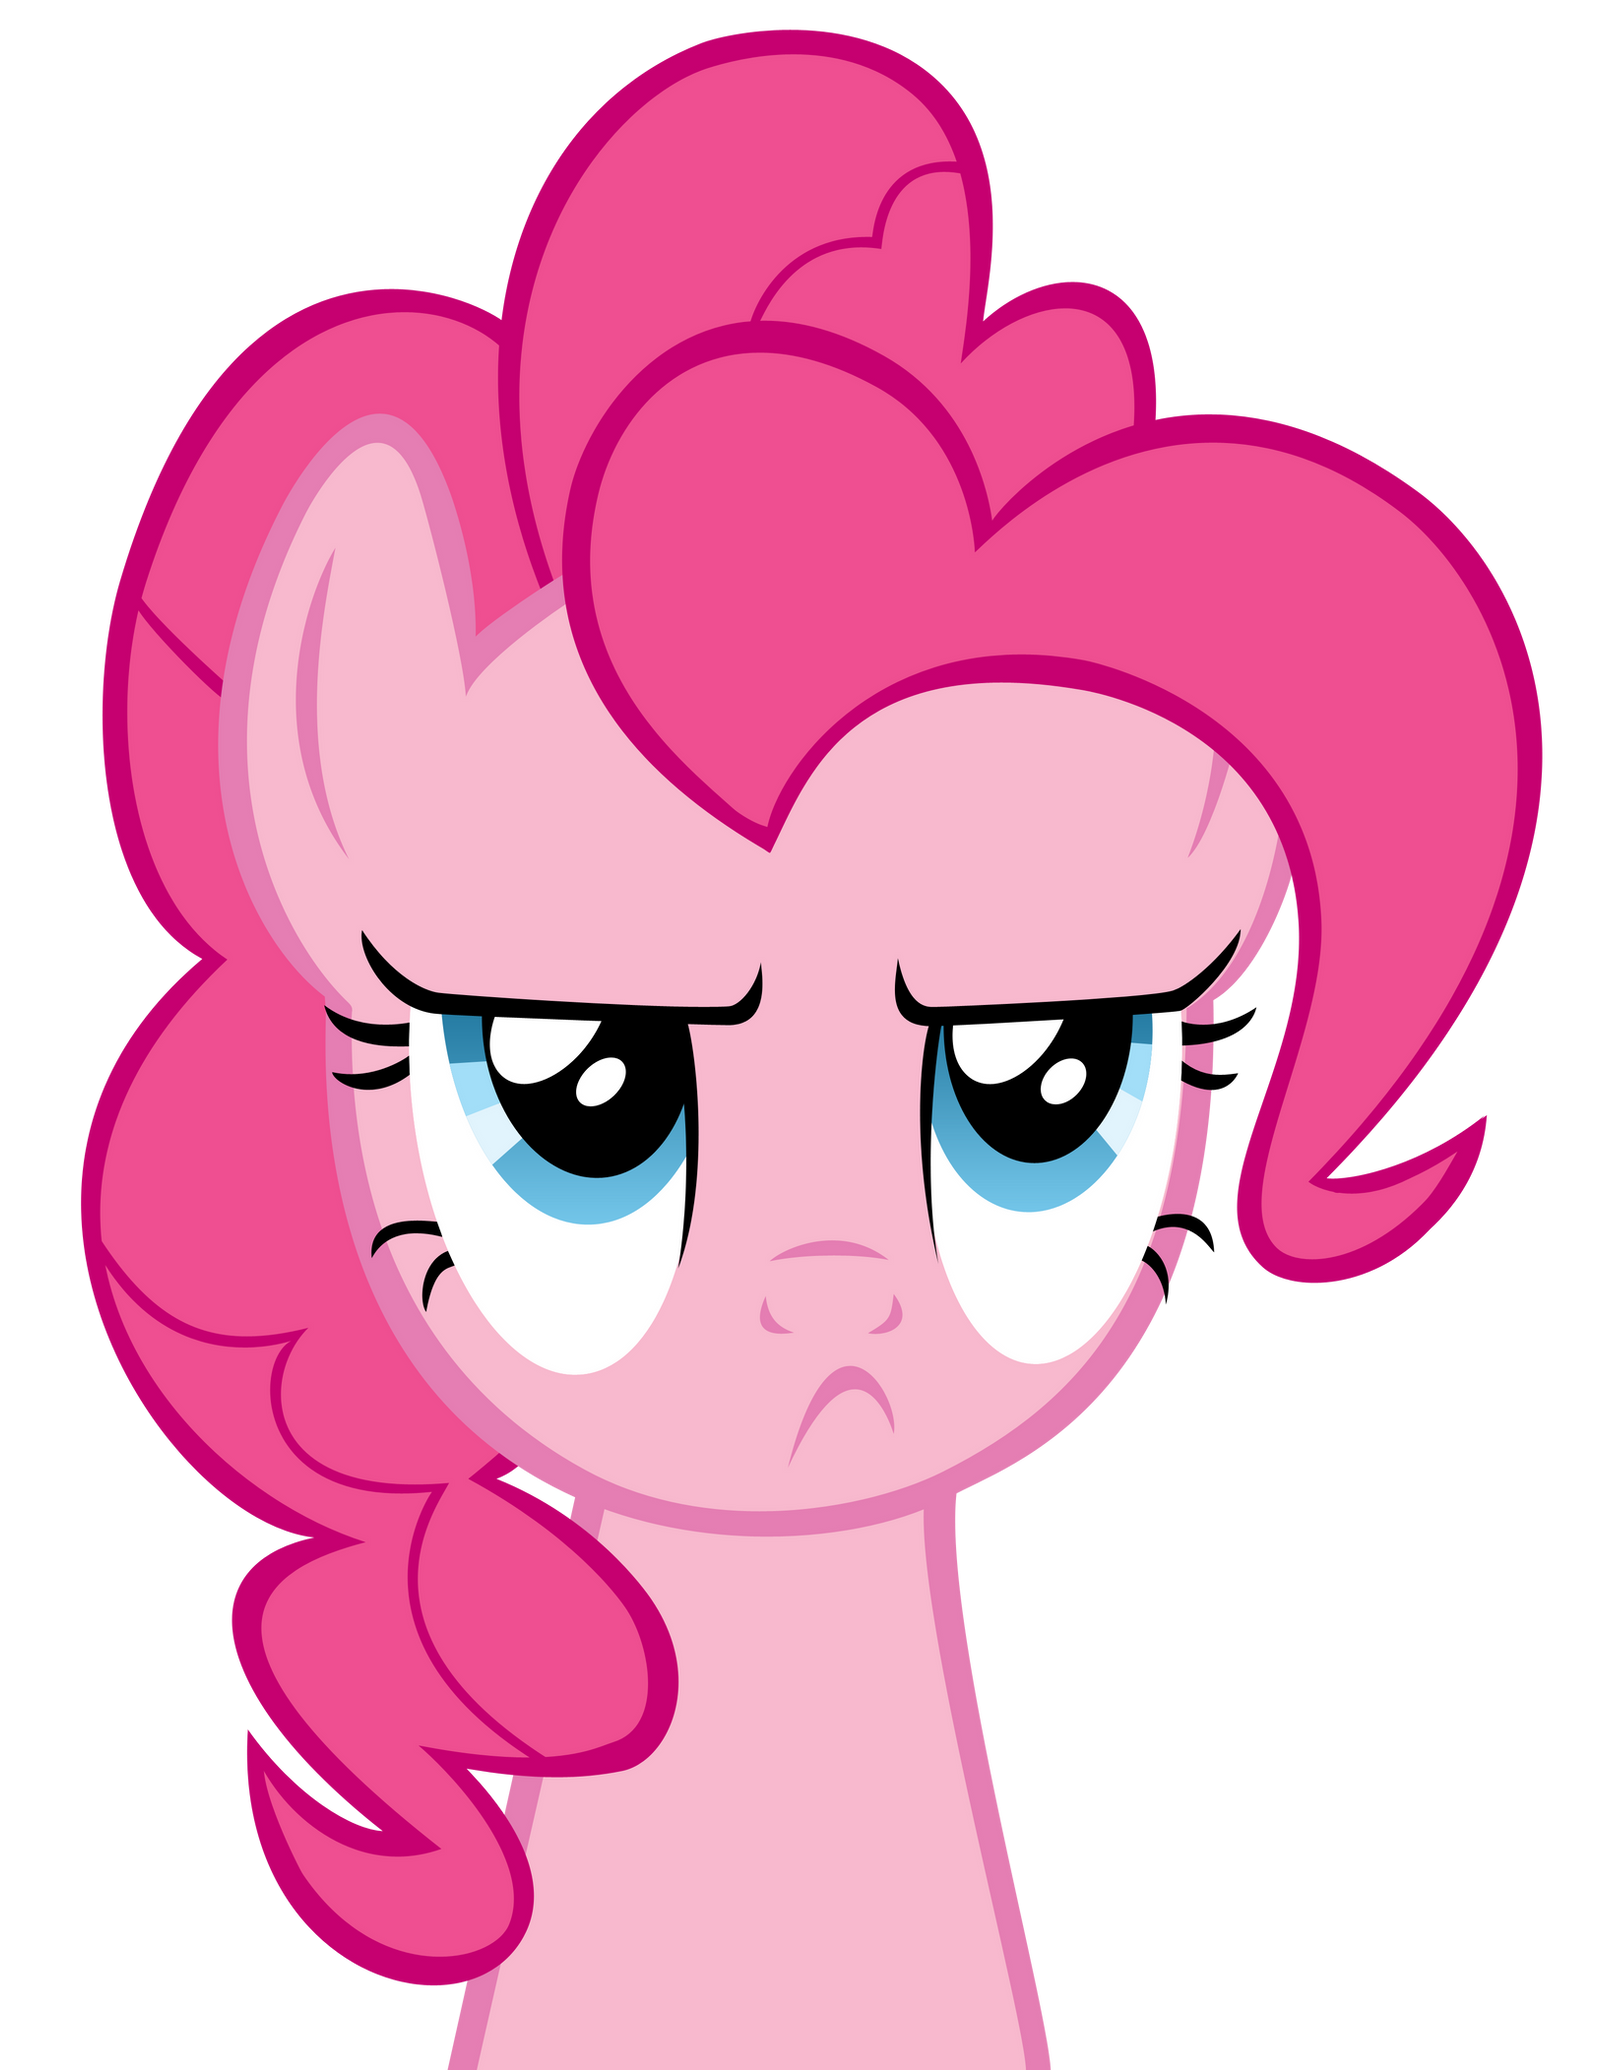 Pinkie Pie is Pouting